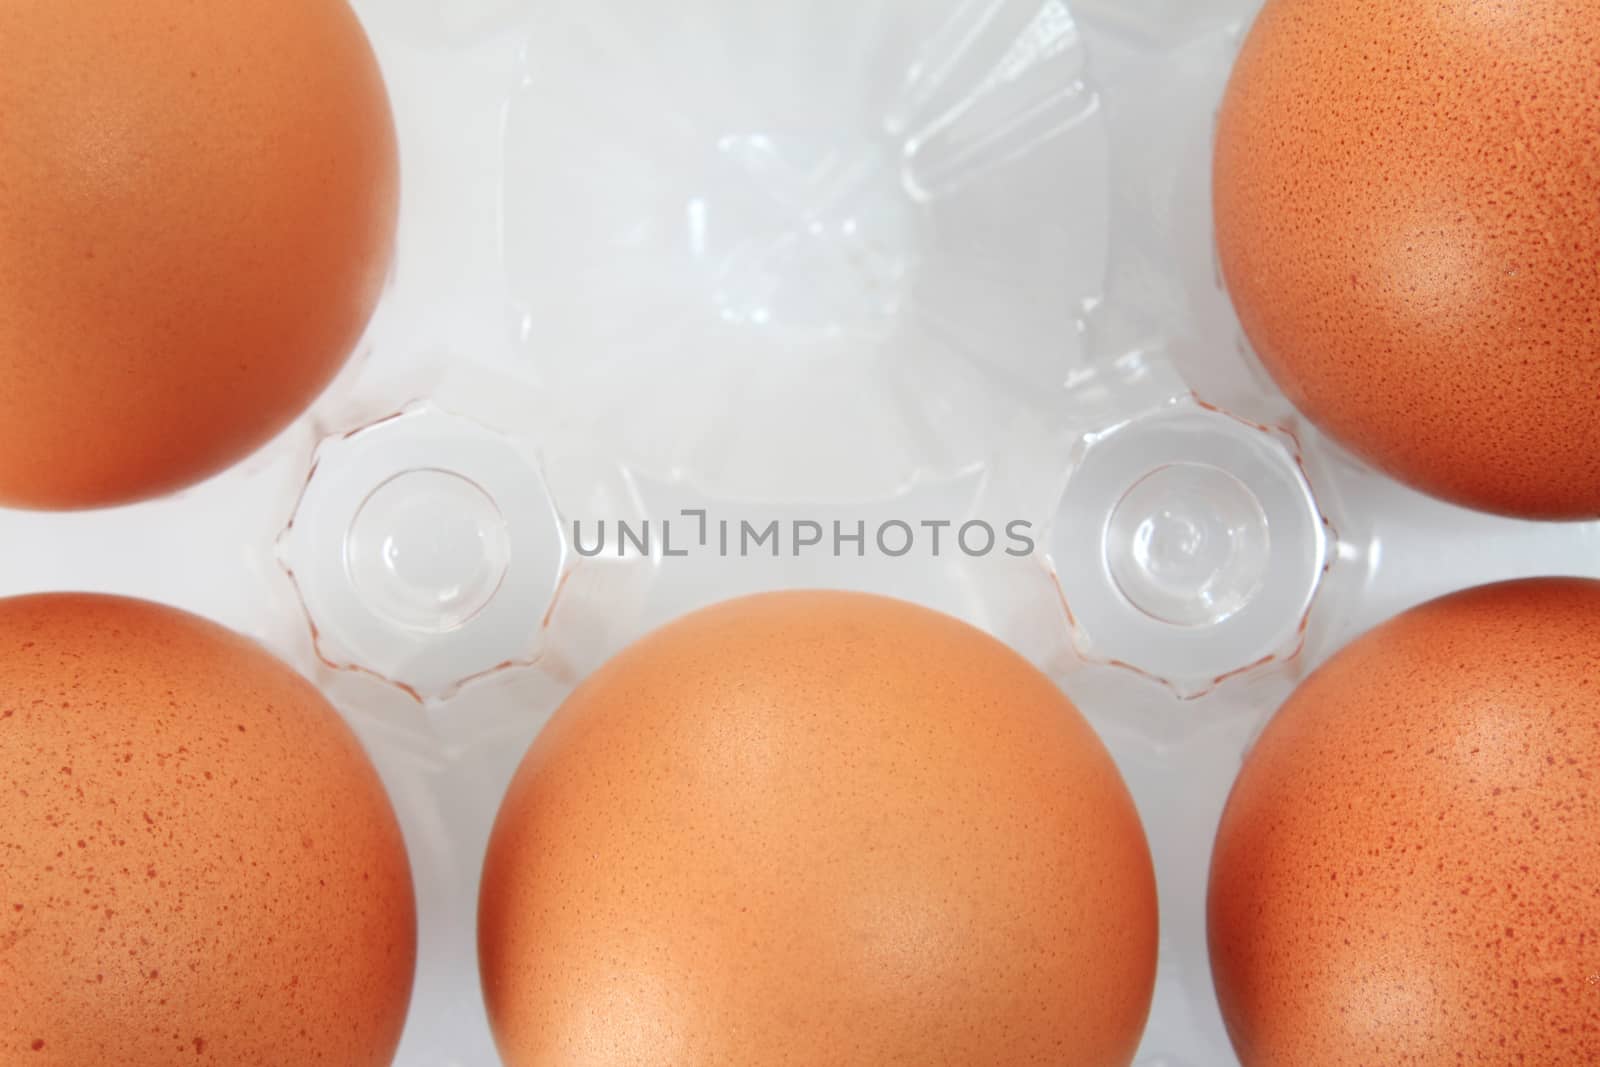 Eggs packed by foto76